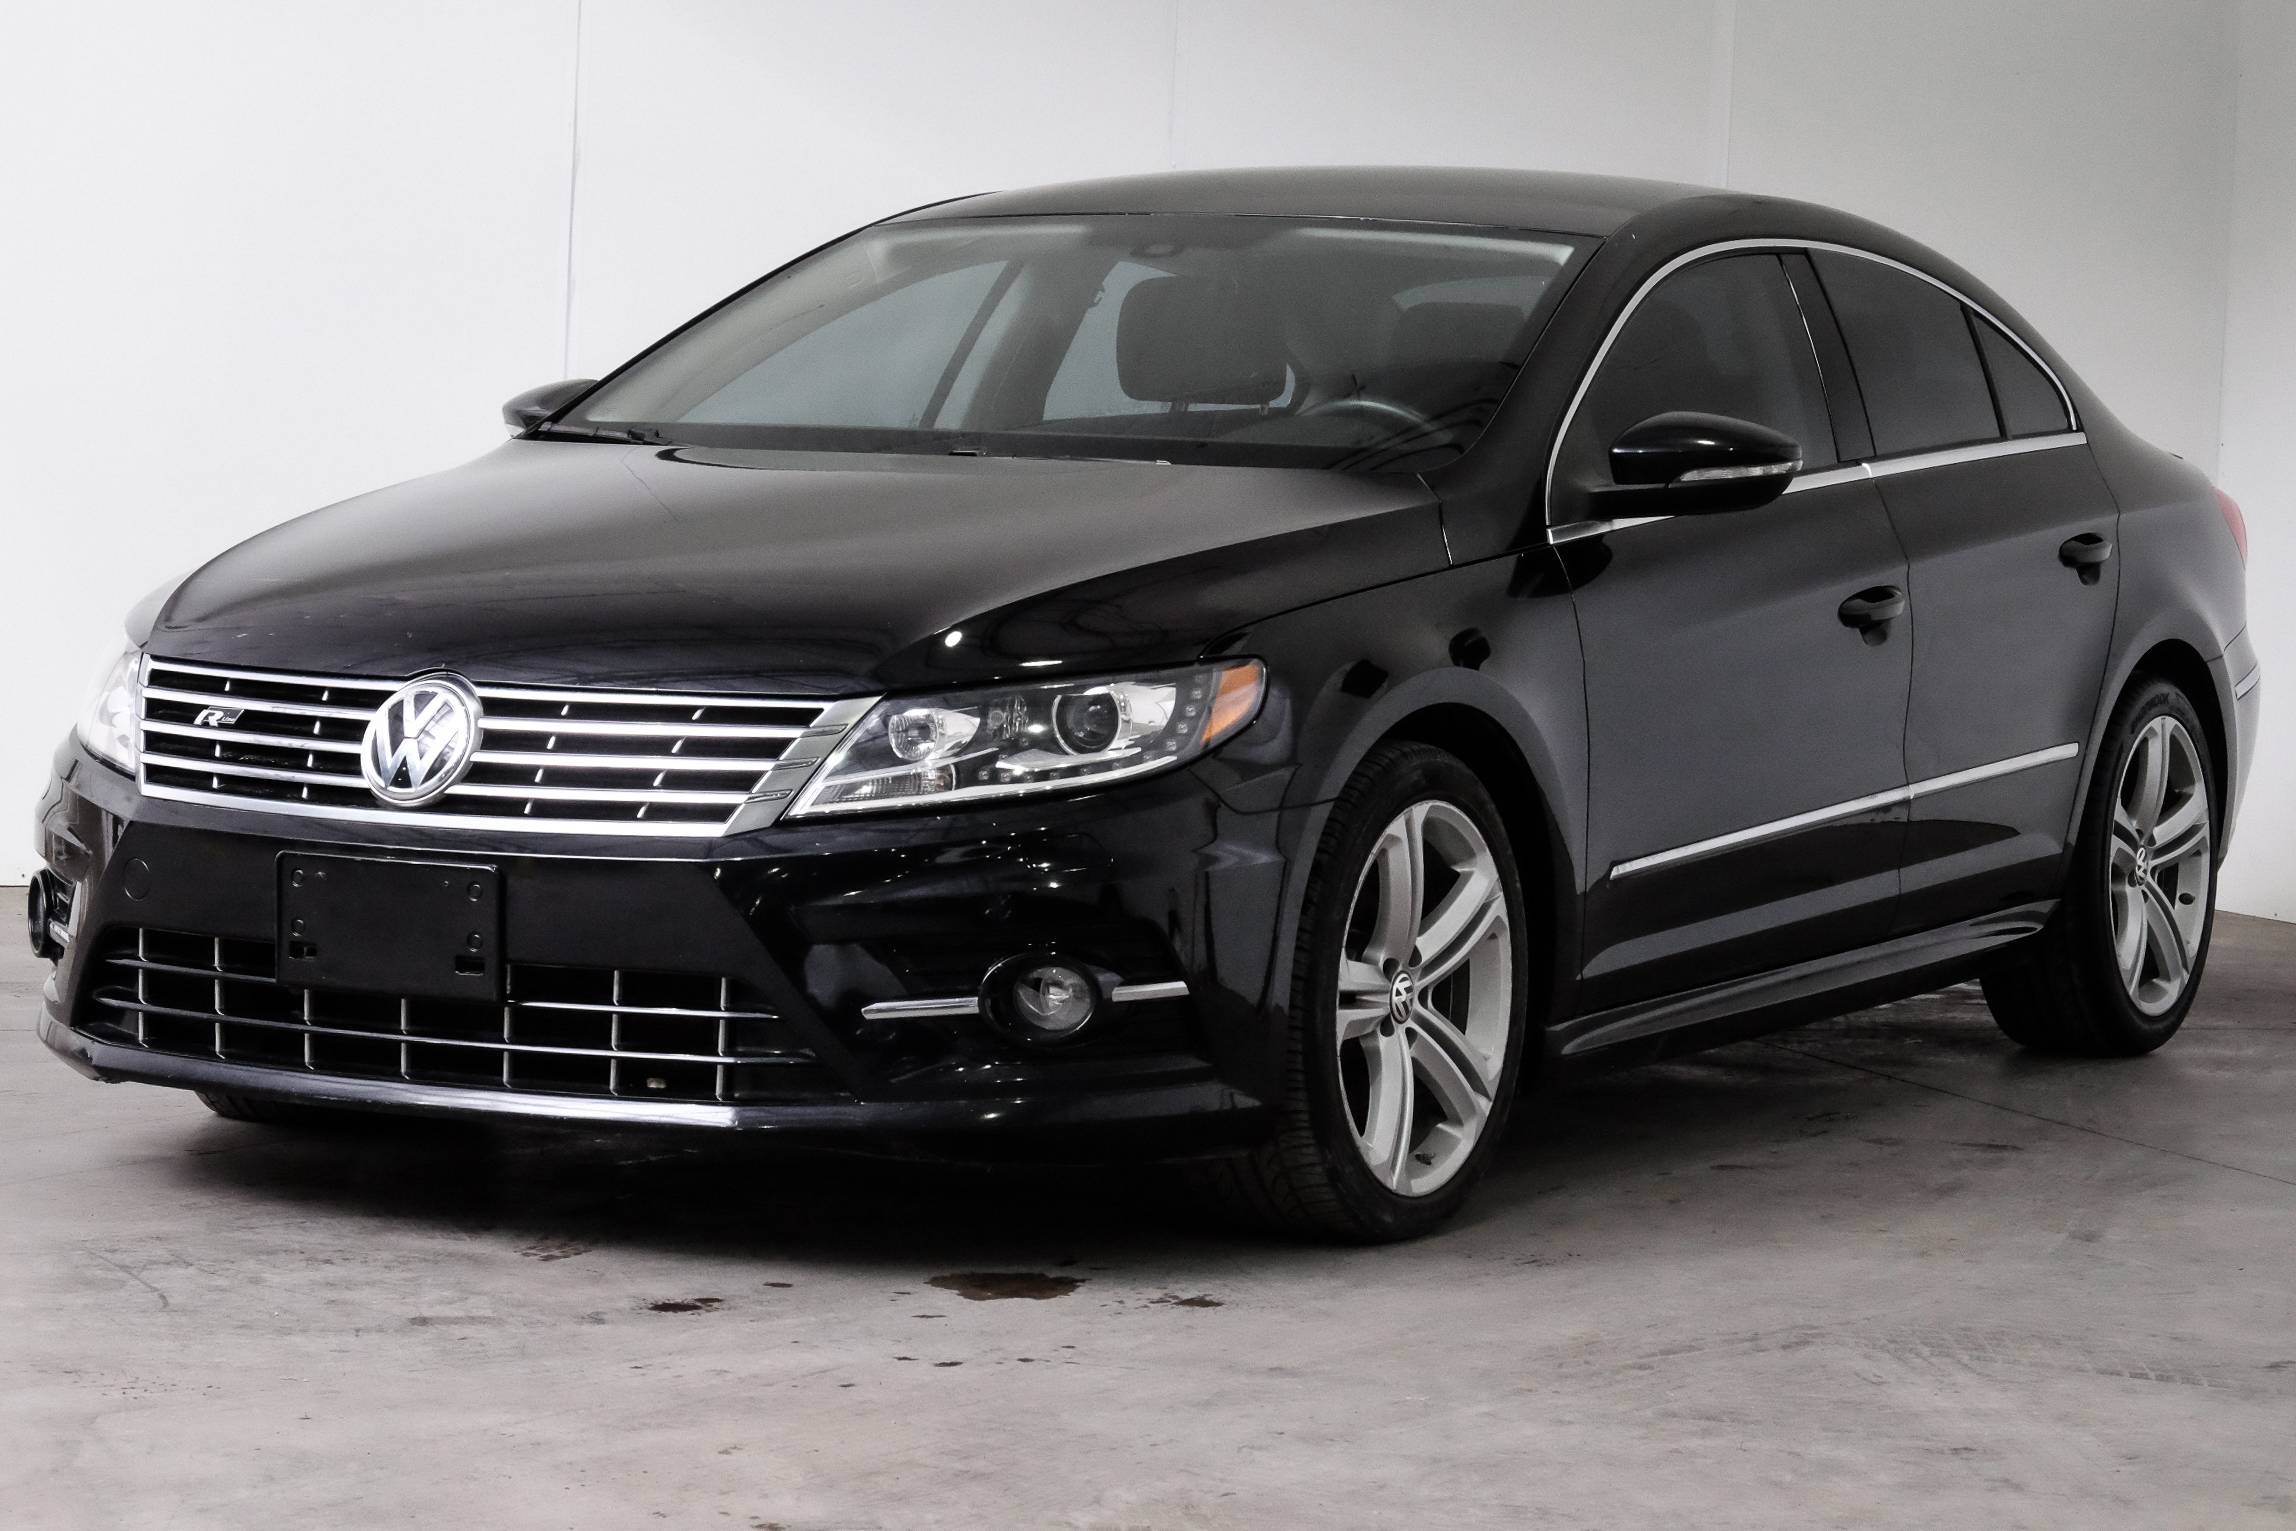 Used 2014 VOLKSWAGEN CC SPORT for sale in CARDEALS.NET PLANO | 11040 | CARDEALS.NET 2012 Volkswagen Cc Tire Size P235 45r17 Sport